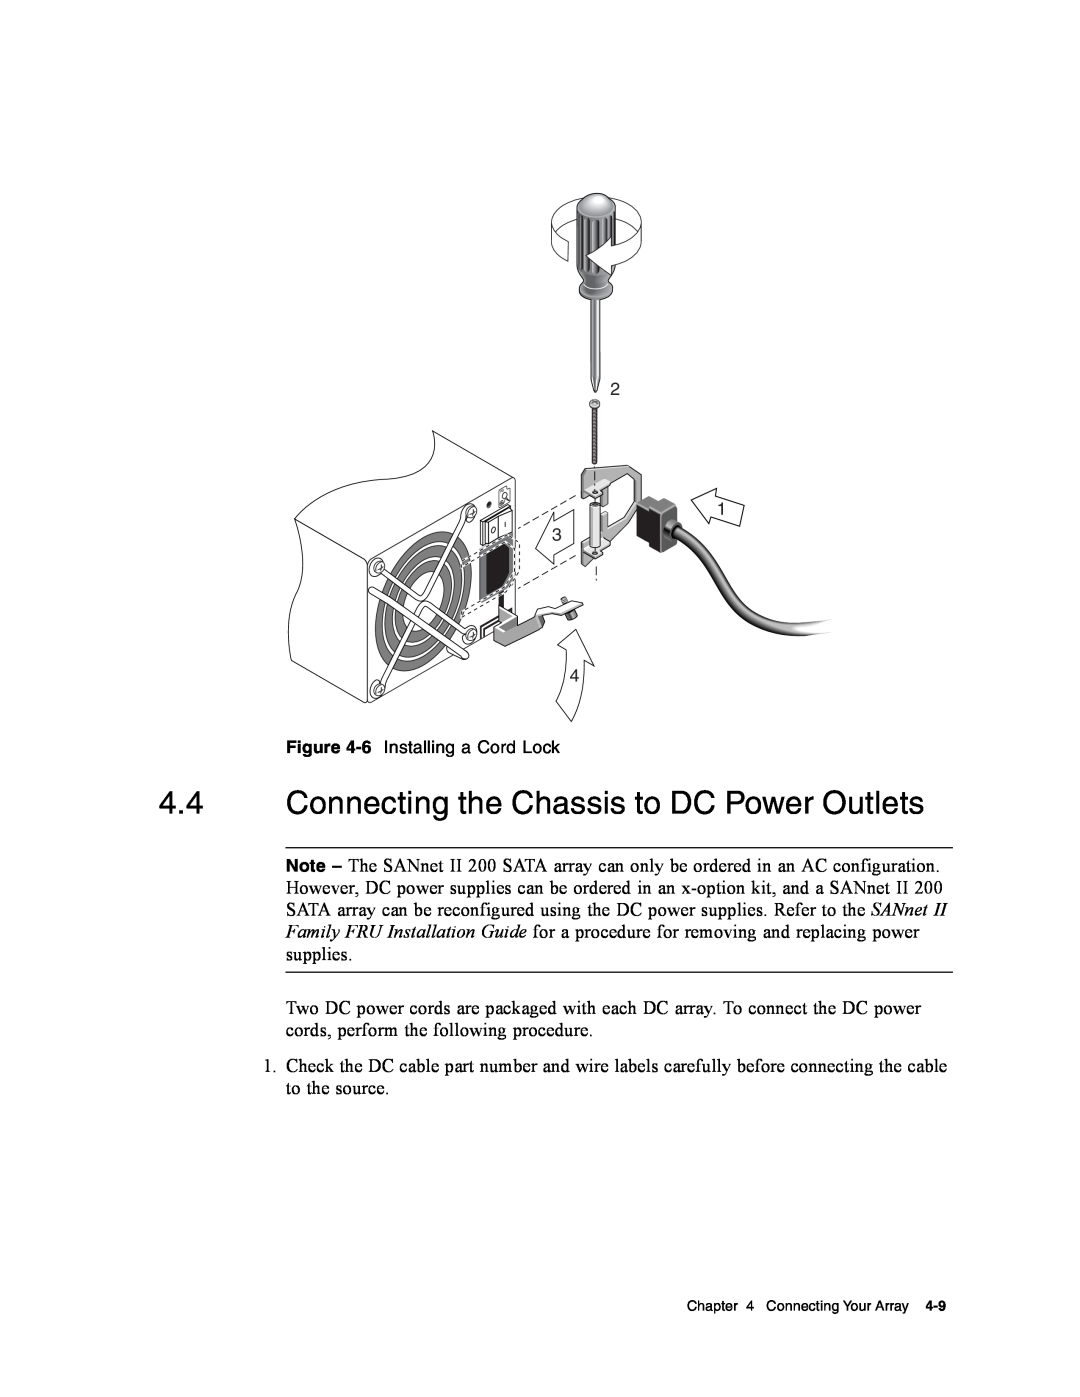 Dot Hill Systems II 200 FC service manual Connecting the Chassis to DC Power Outlets, 6 Installing a Cord Lock 